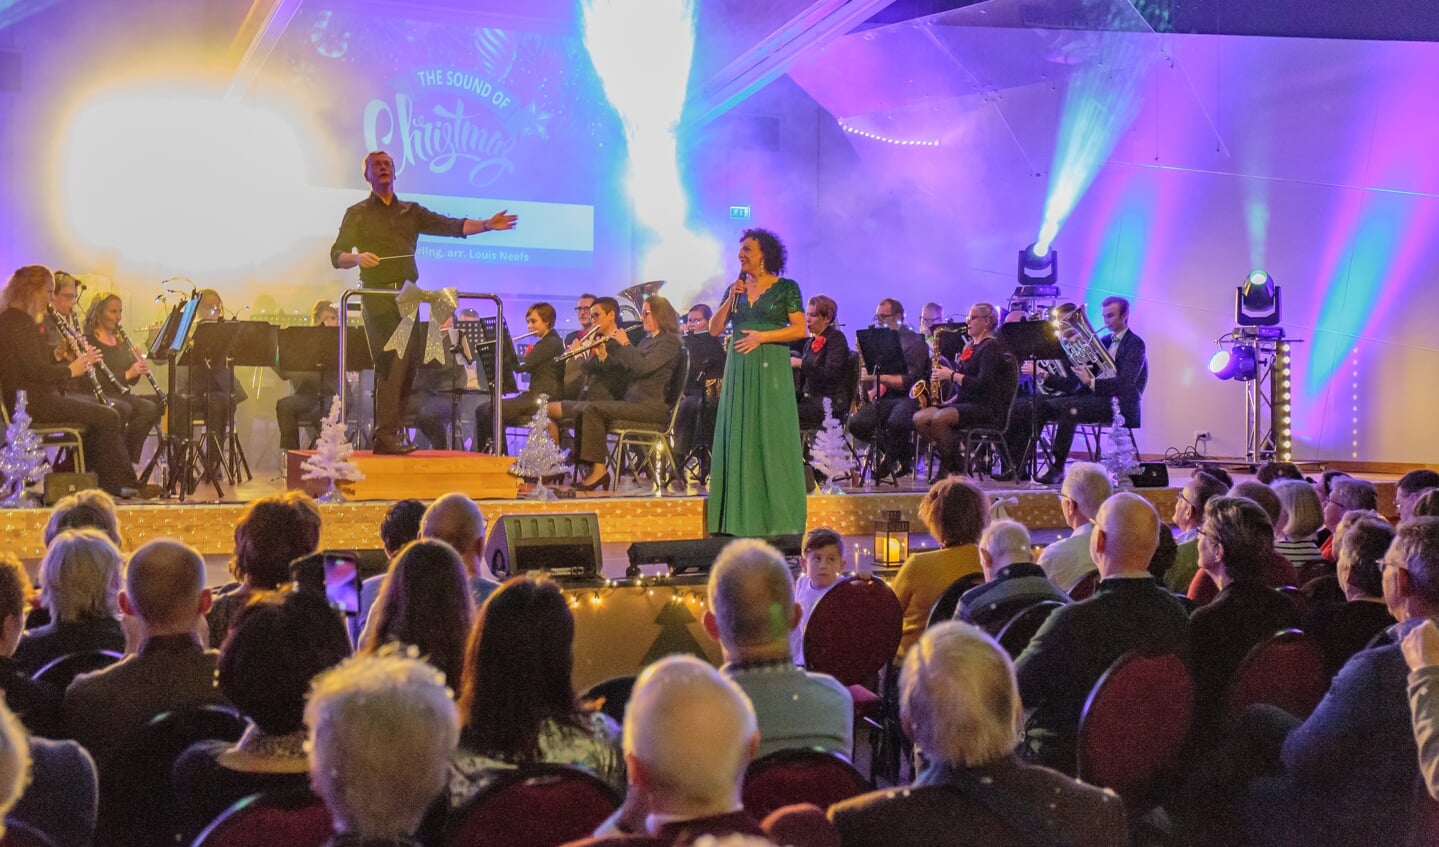 2019 - Groots kerstconcert 'The Sound of Christmas' in 't Podium